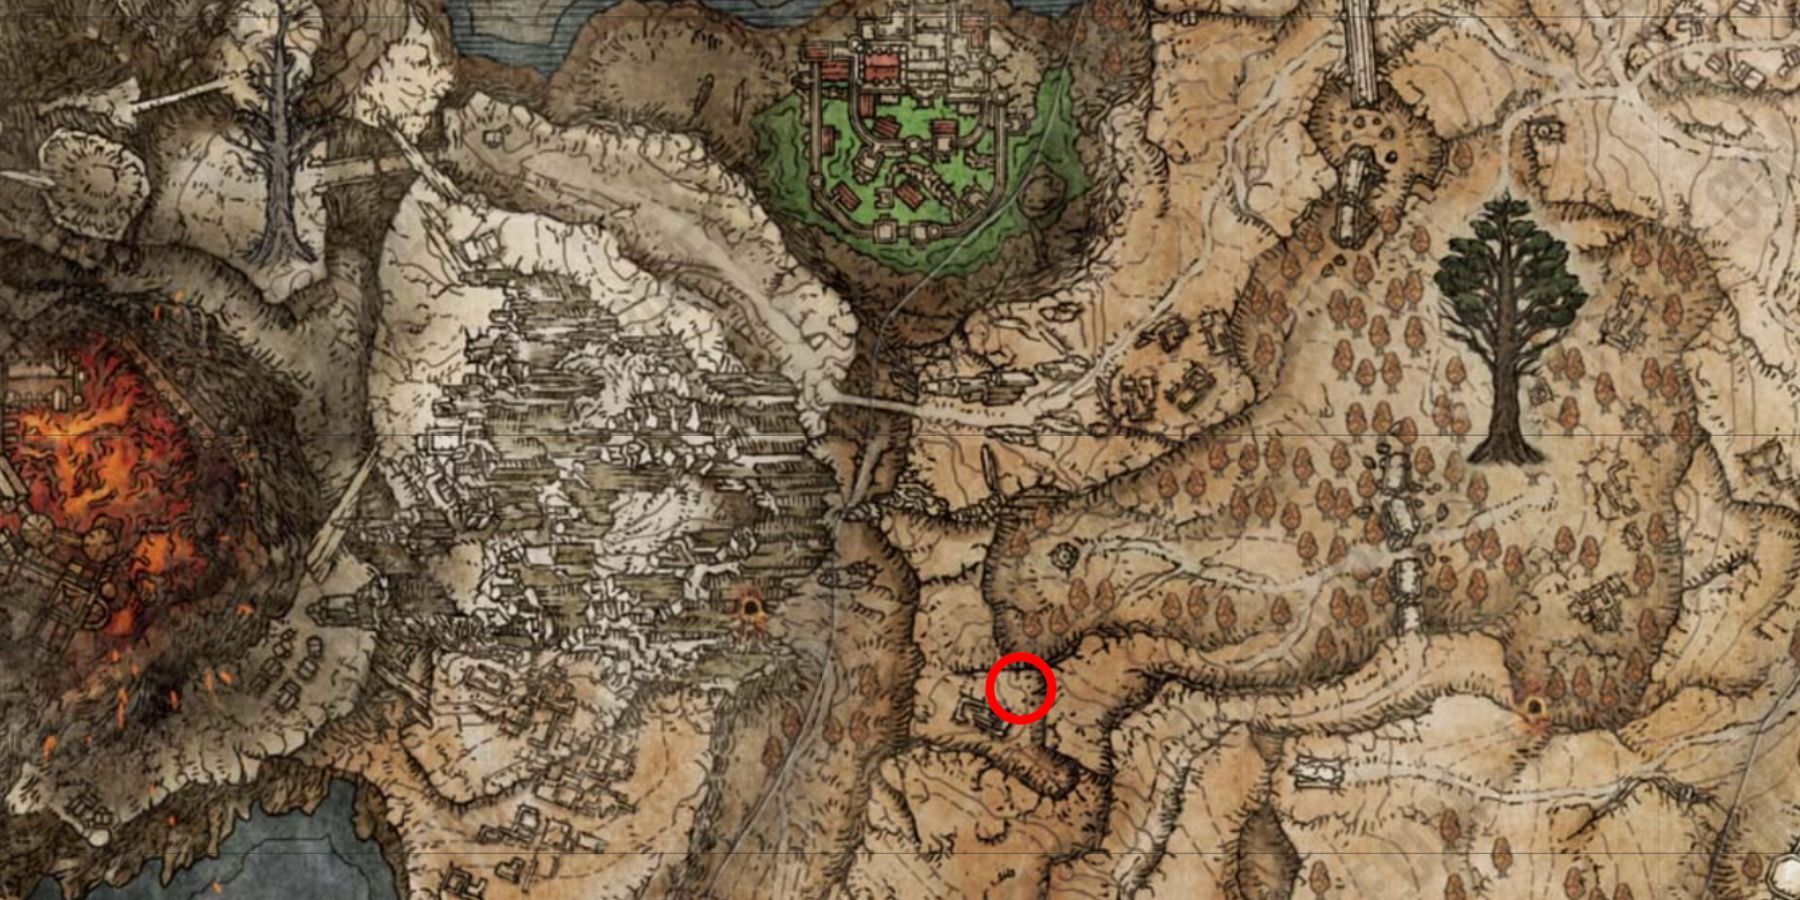 Eleonora, the Violet Bloody Finger boss location on the map in Elden Ring